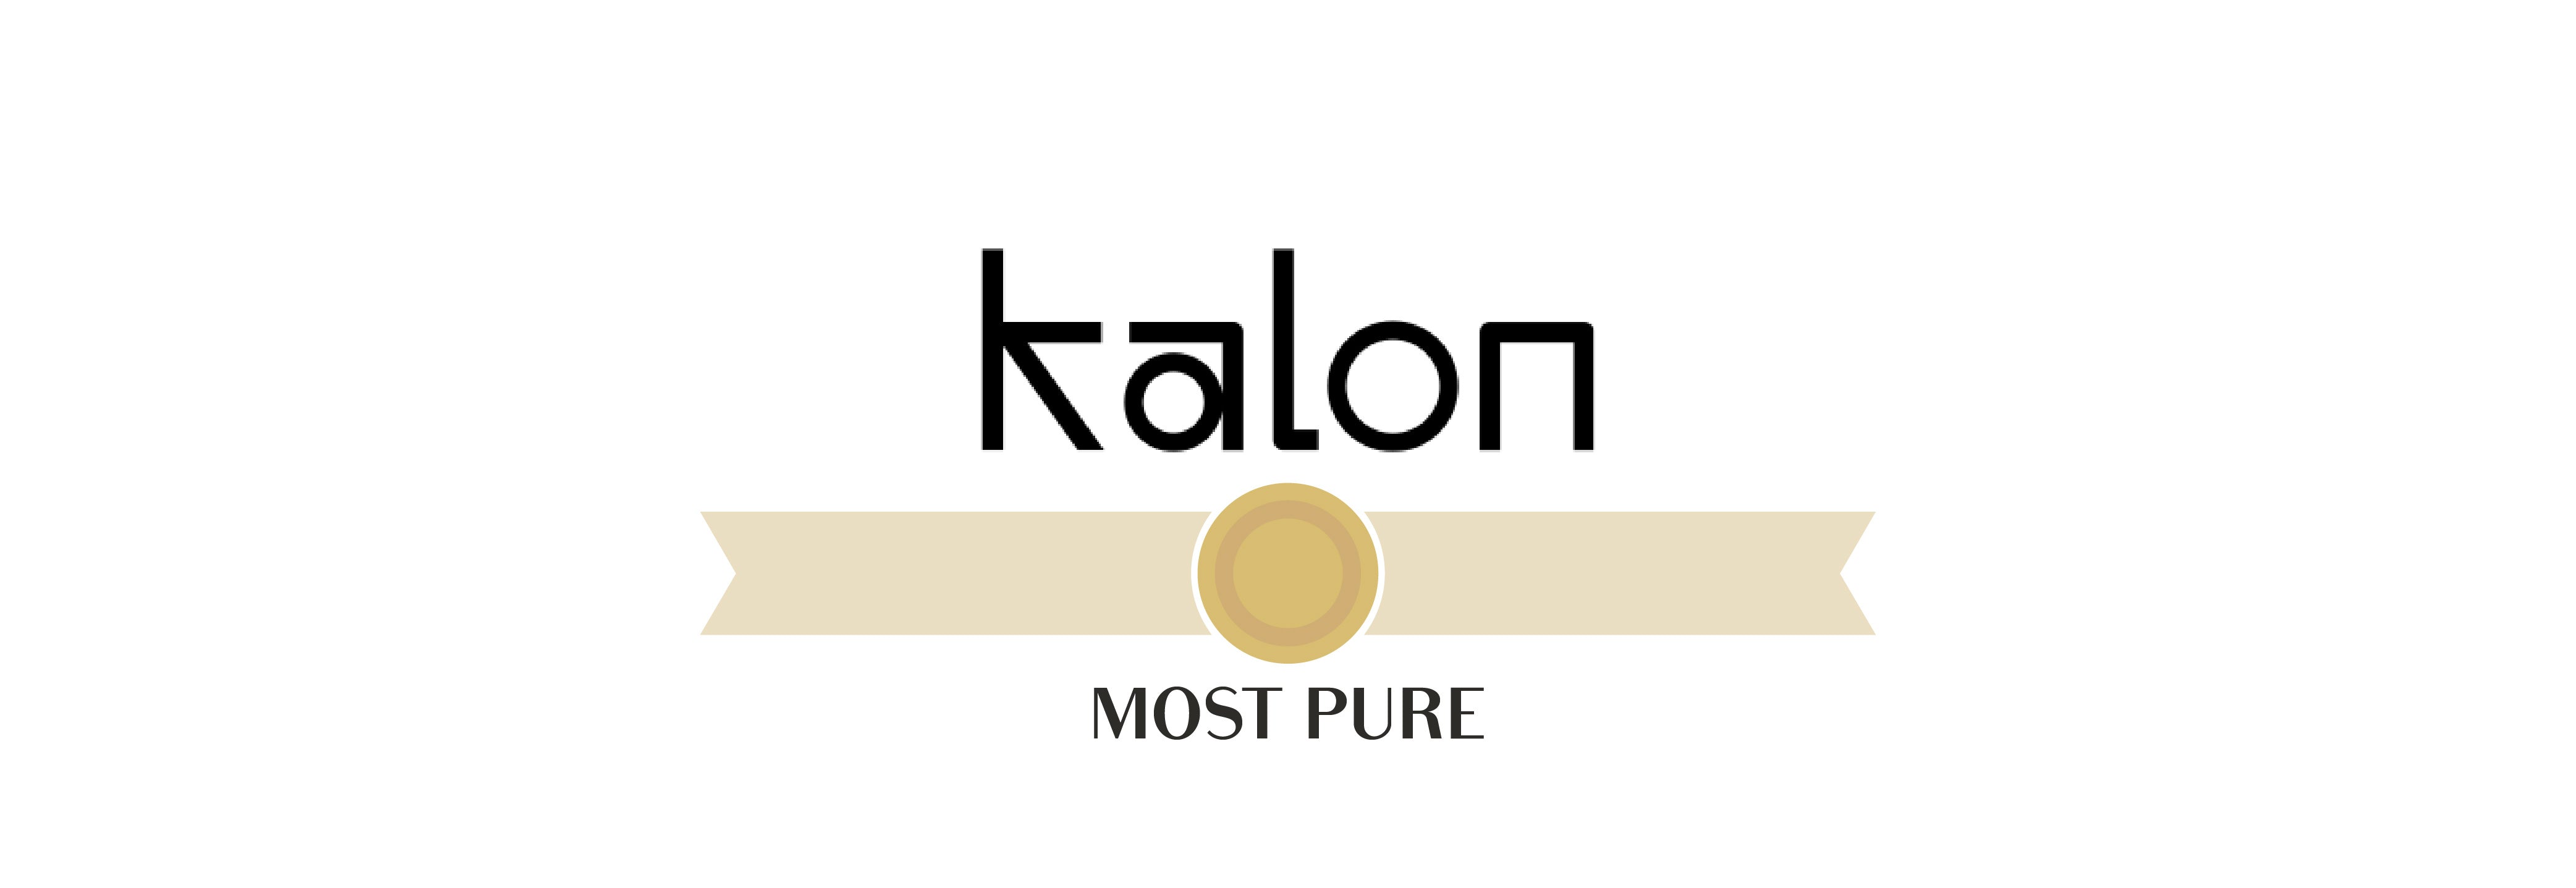 Kalon logo with golden medal and ribbon, text below that says "most pure".